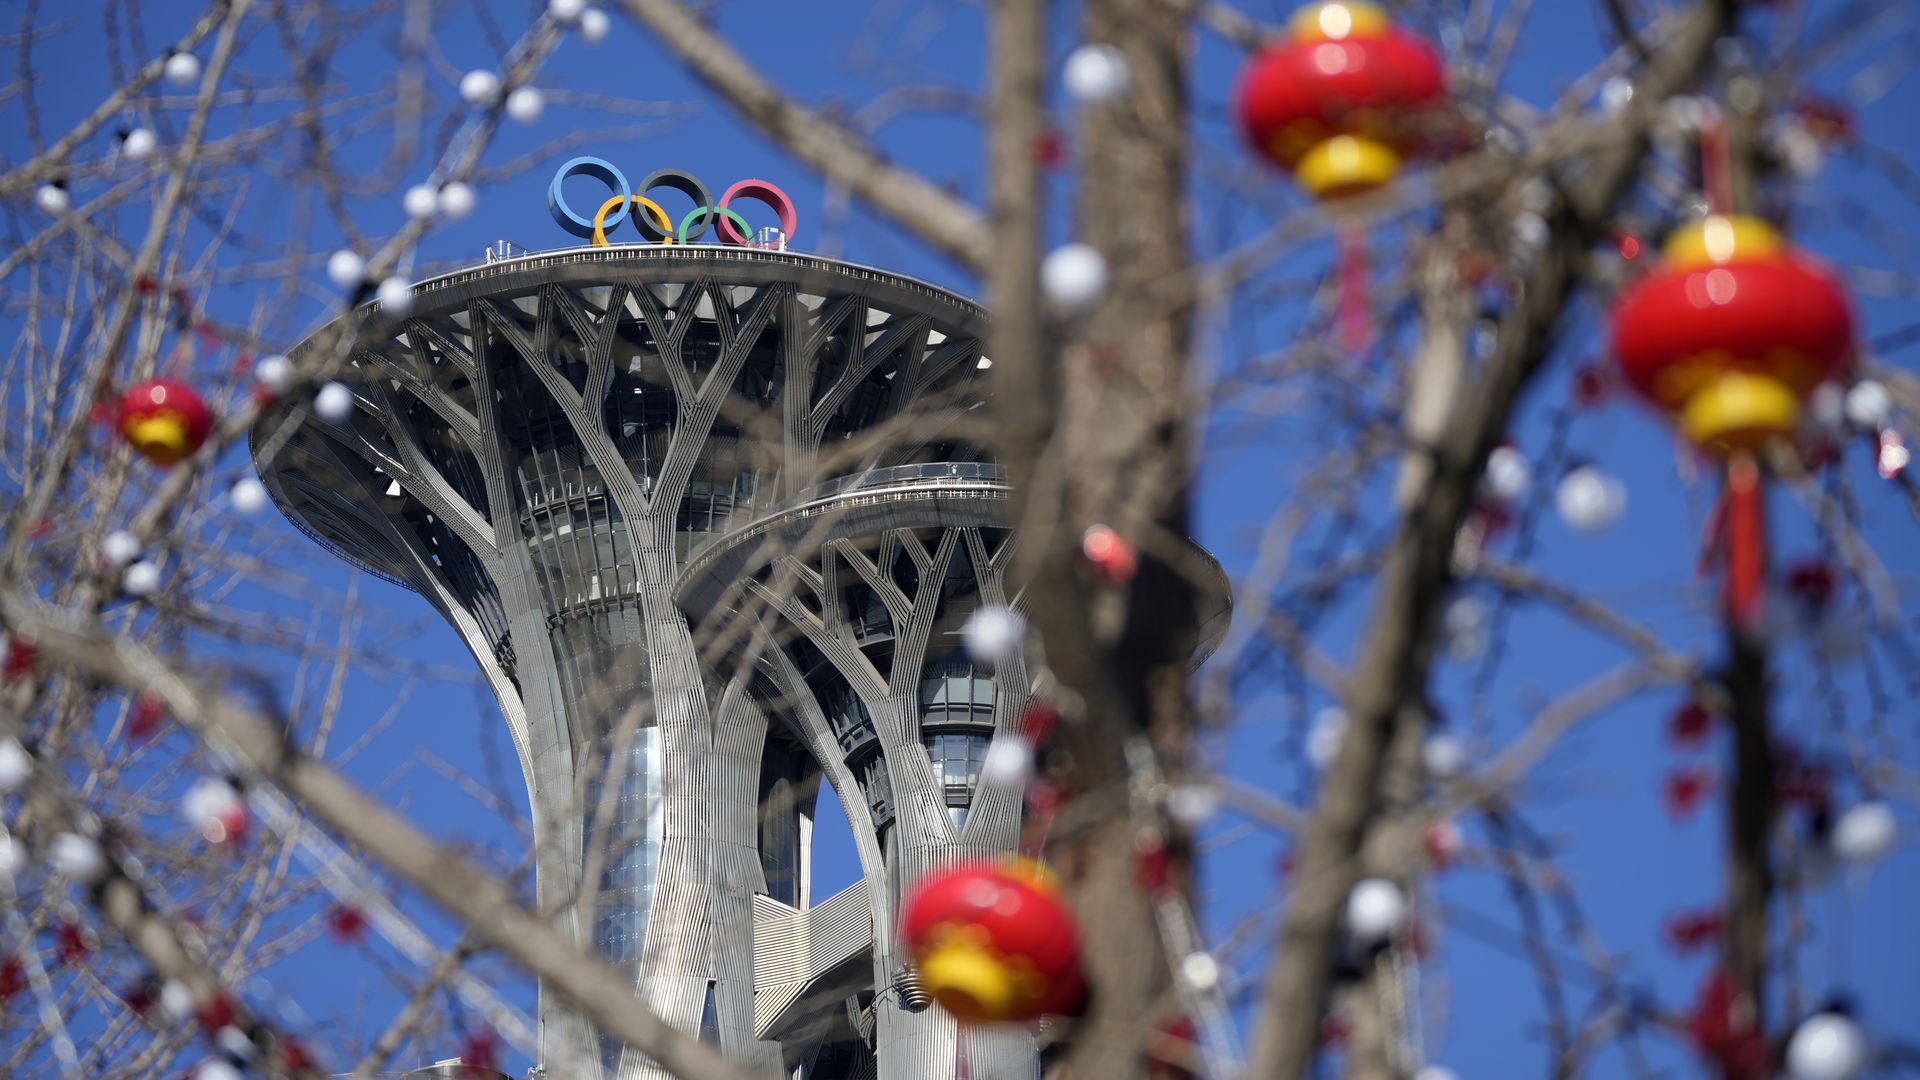 Lantern decorations hang on trees on the Olympic Green near the Olympic Tower in Beijing